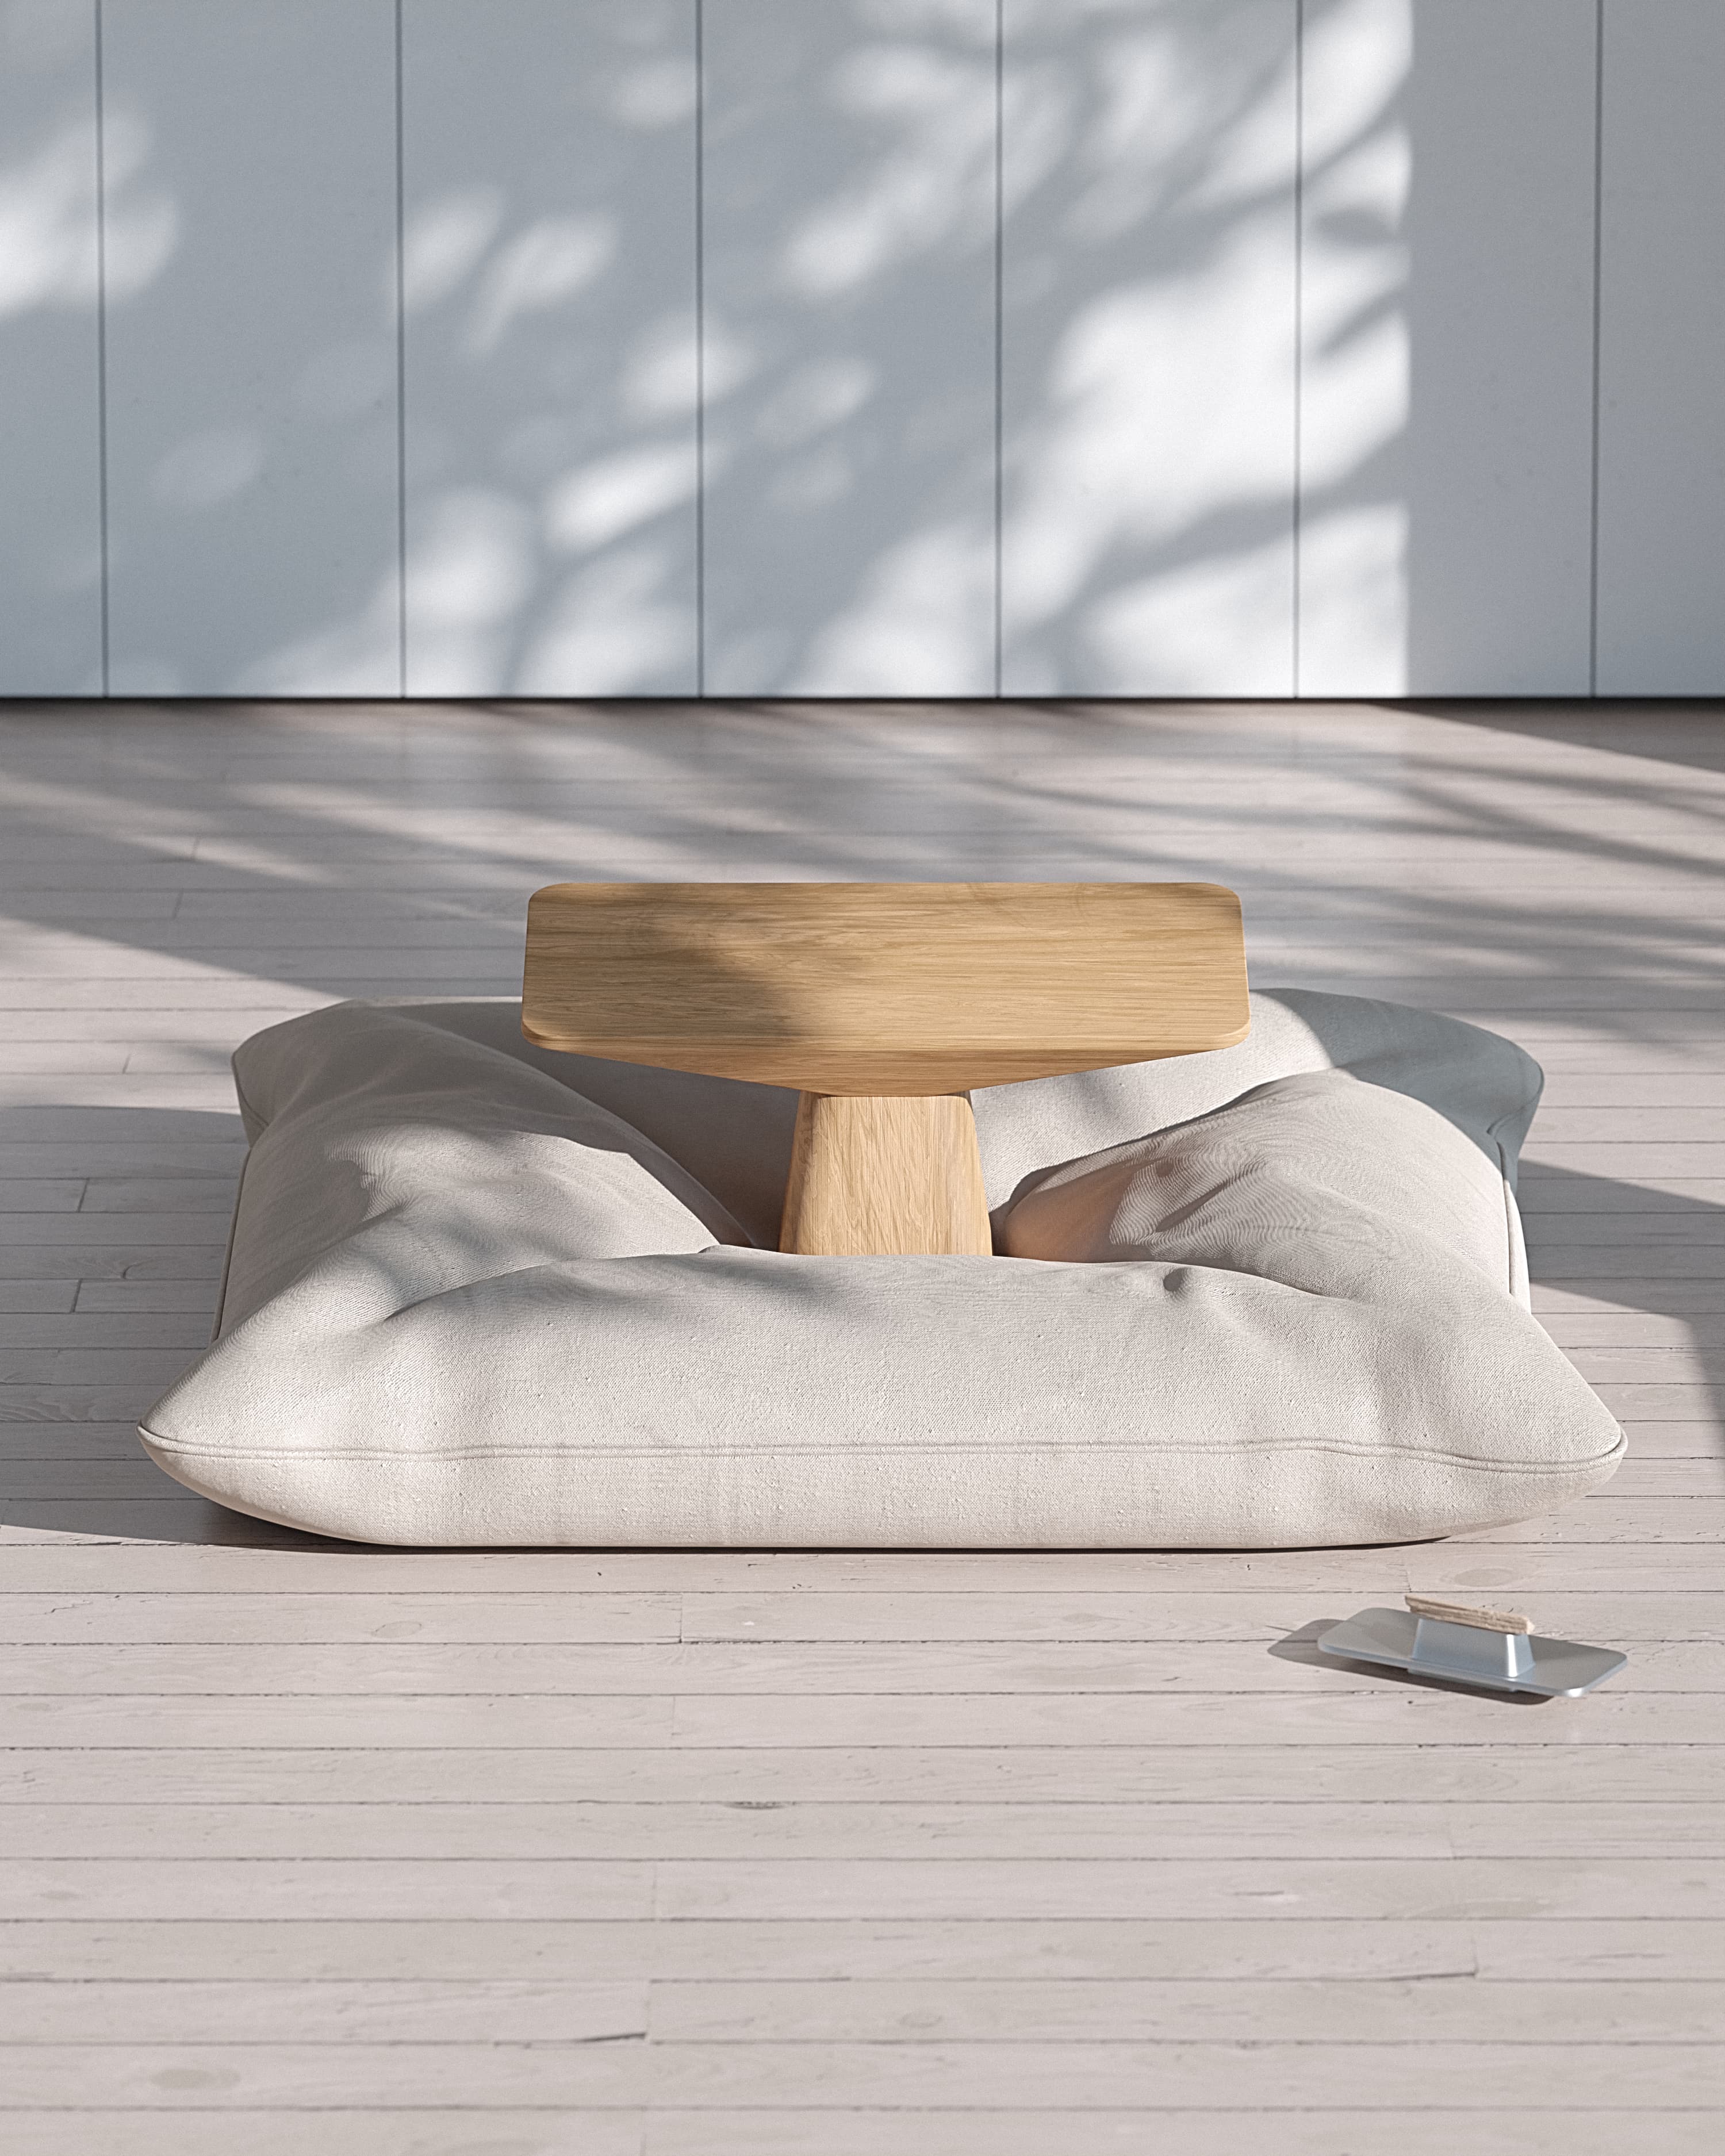 How to Choose a Meditation Cushion or Bench